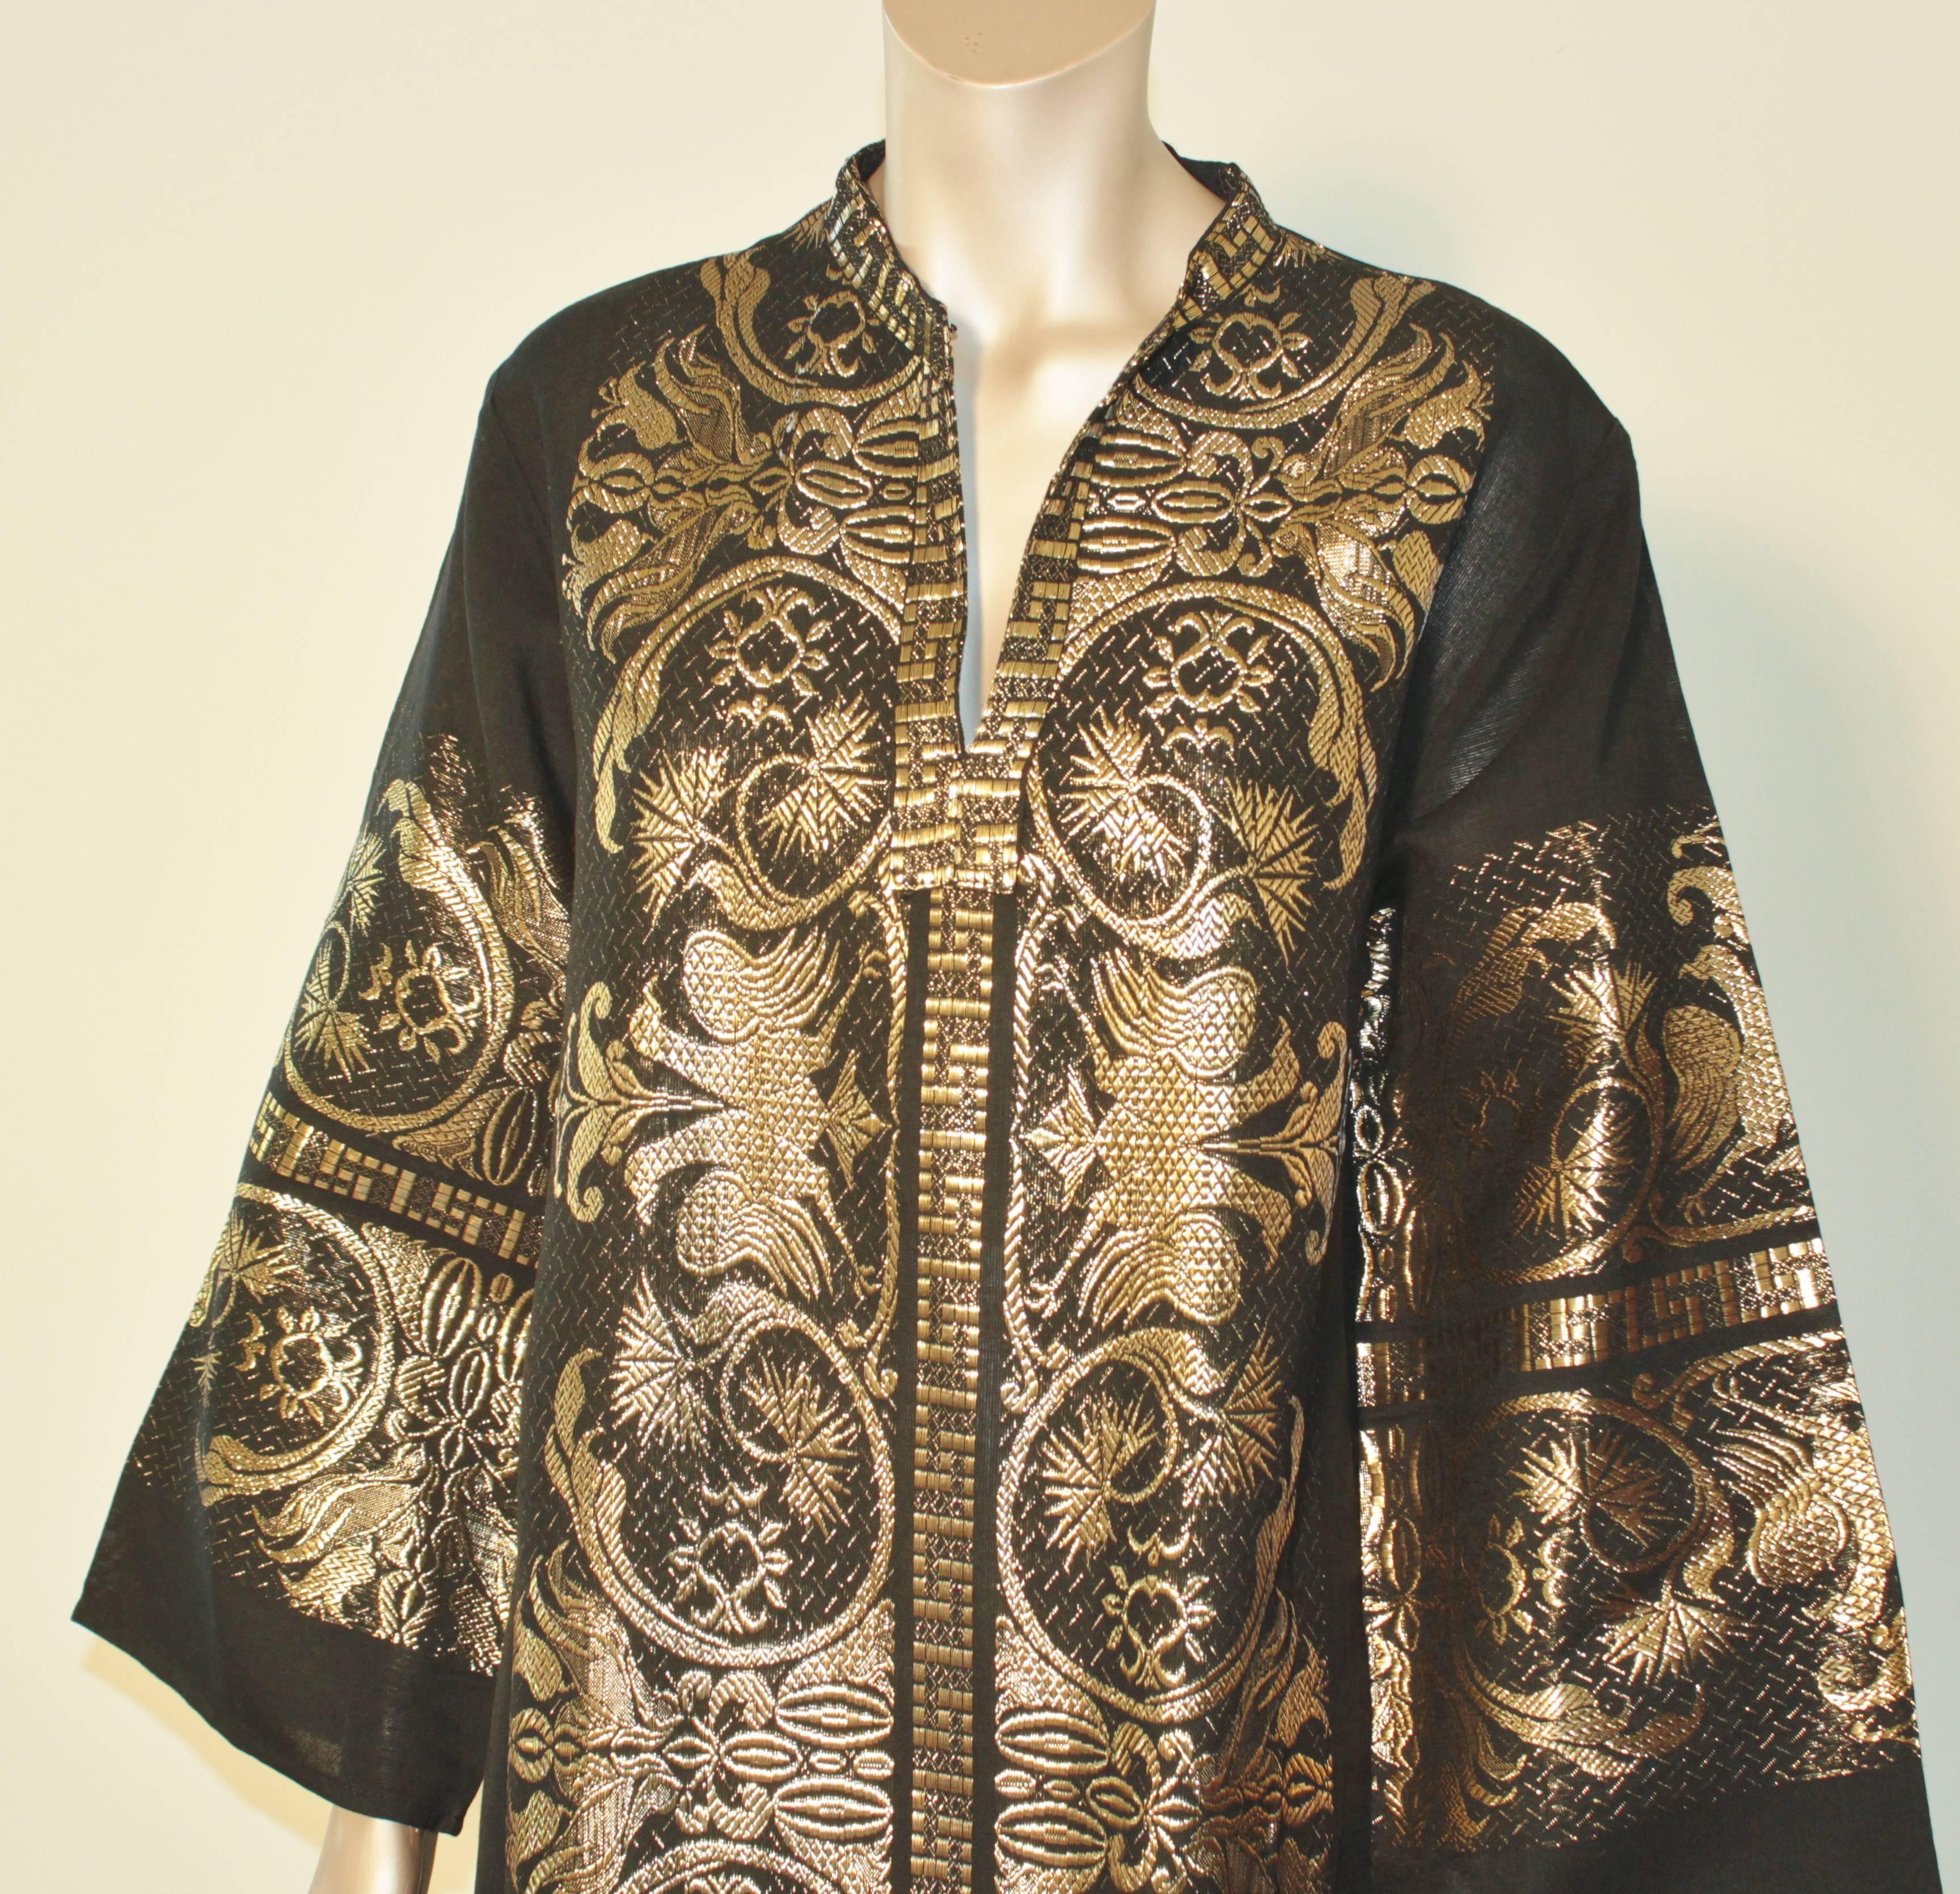 Vintage 1970s black cotton and gold lamé embroidered caftan maxi dress.
Long sleeves.
Absolutely beautiful maxi dress Kaftan made in Greece.
Rich golden metallic detailing all-over. 
Professionally cleaned and thoroughly checked before shipping.